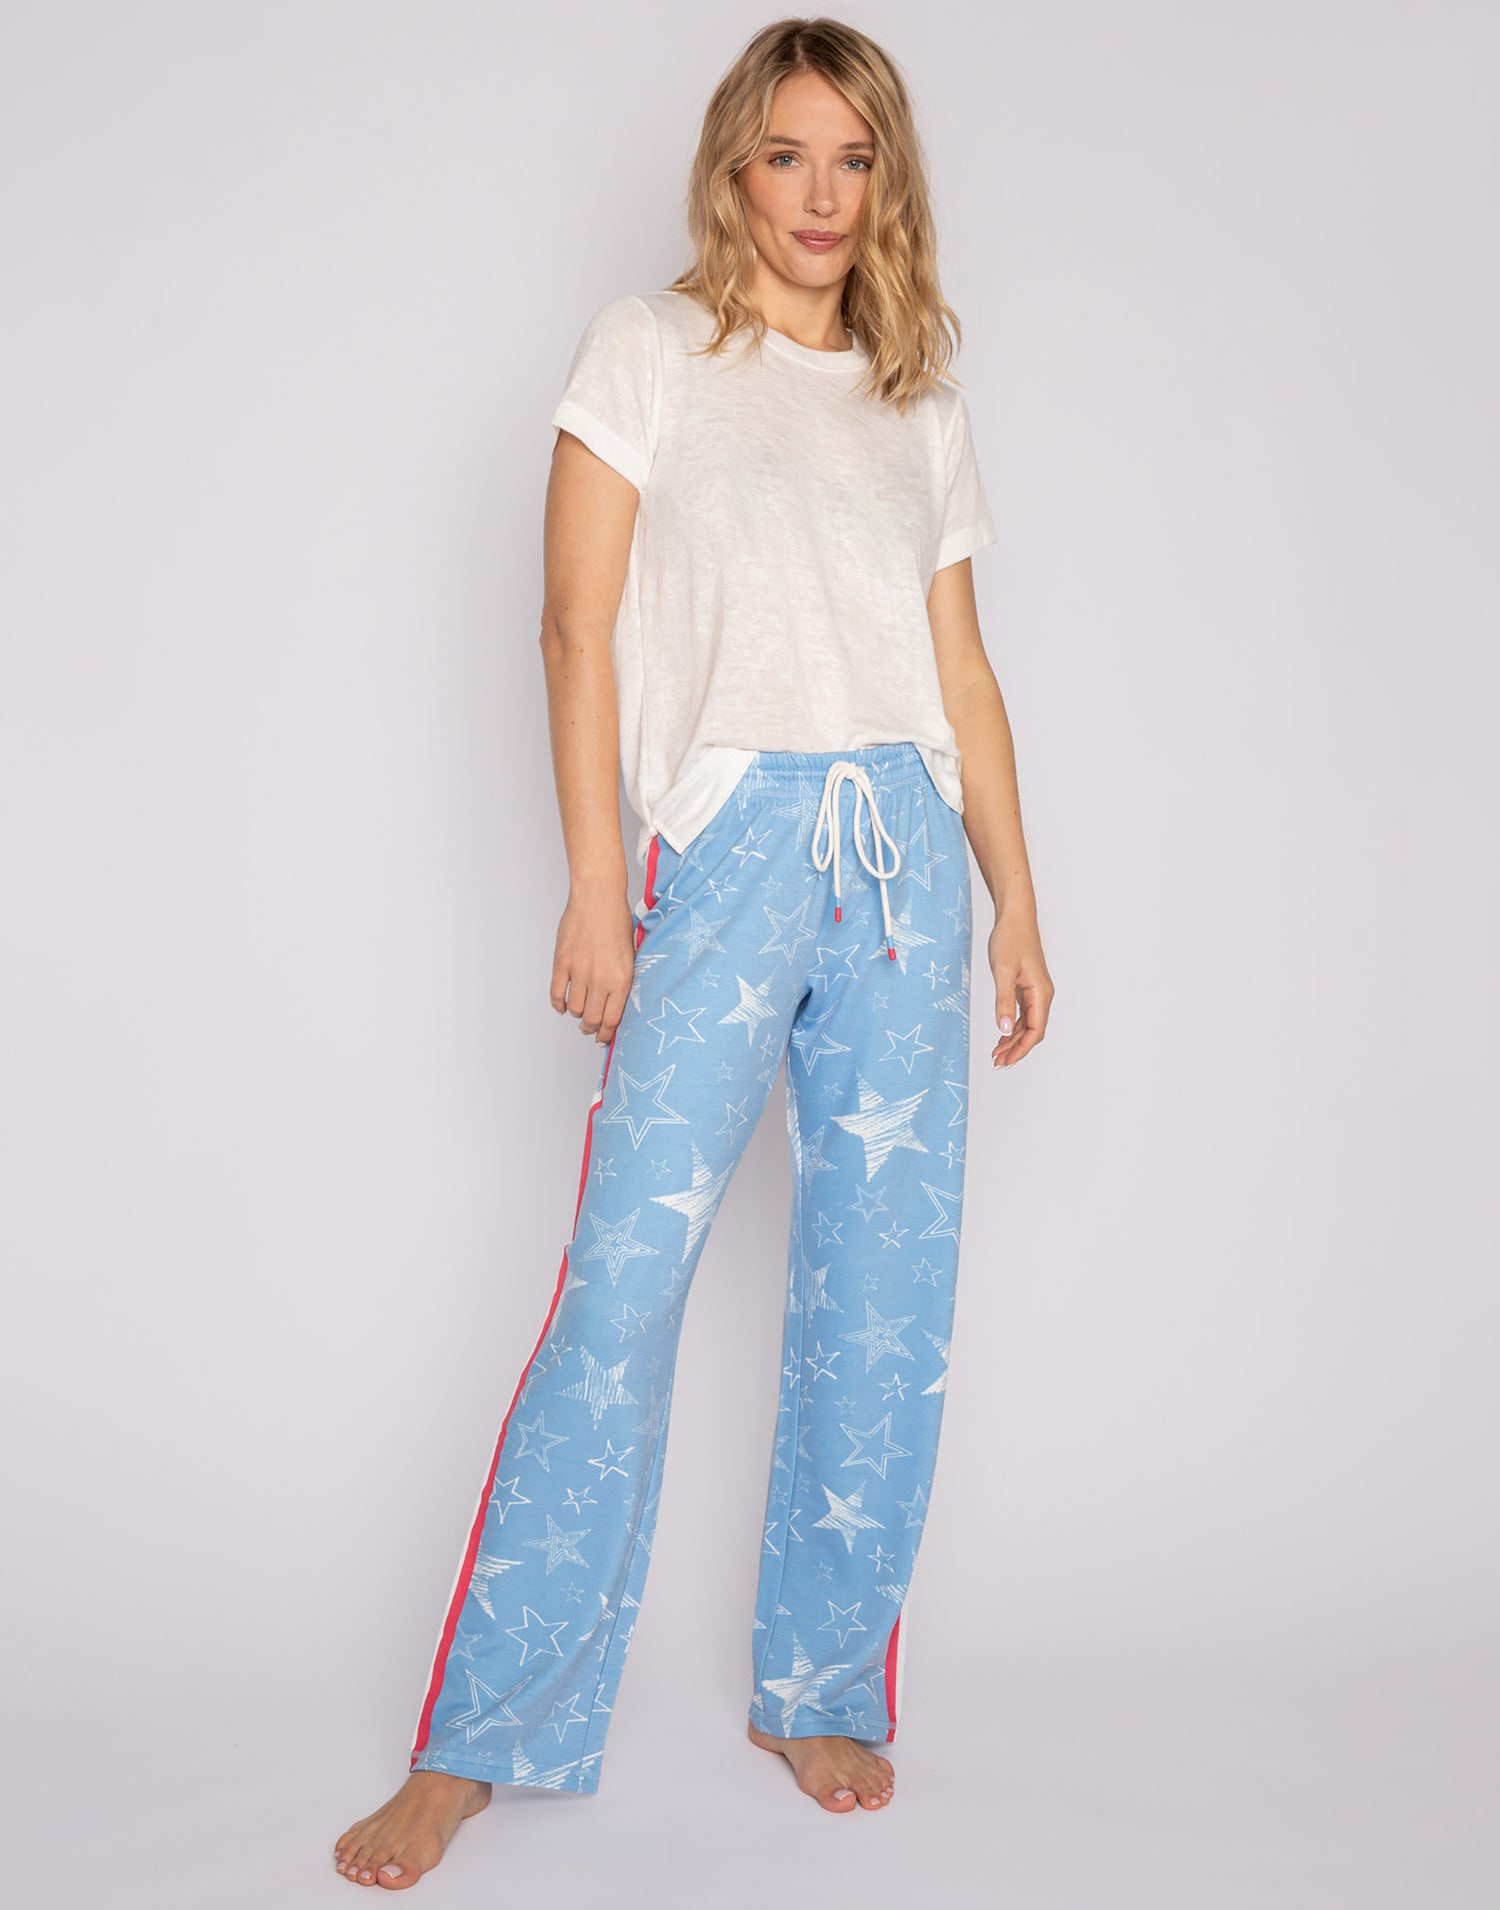 Star Spangled Pant by P.J. Salvage in Tranquil Blue - Front View